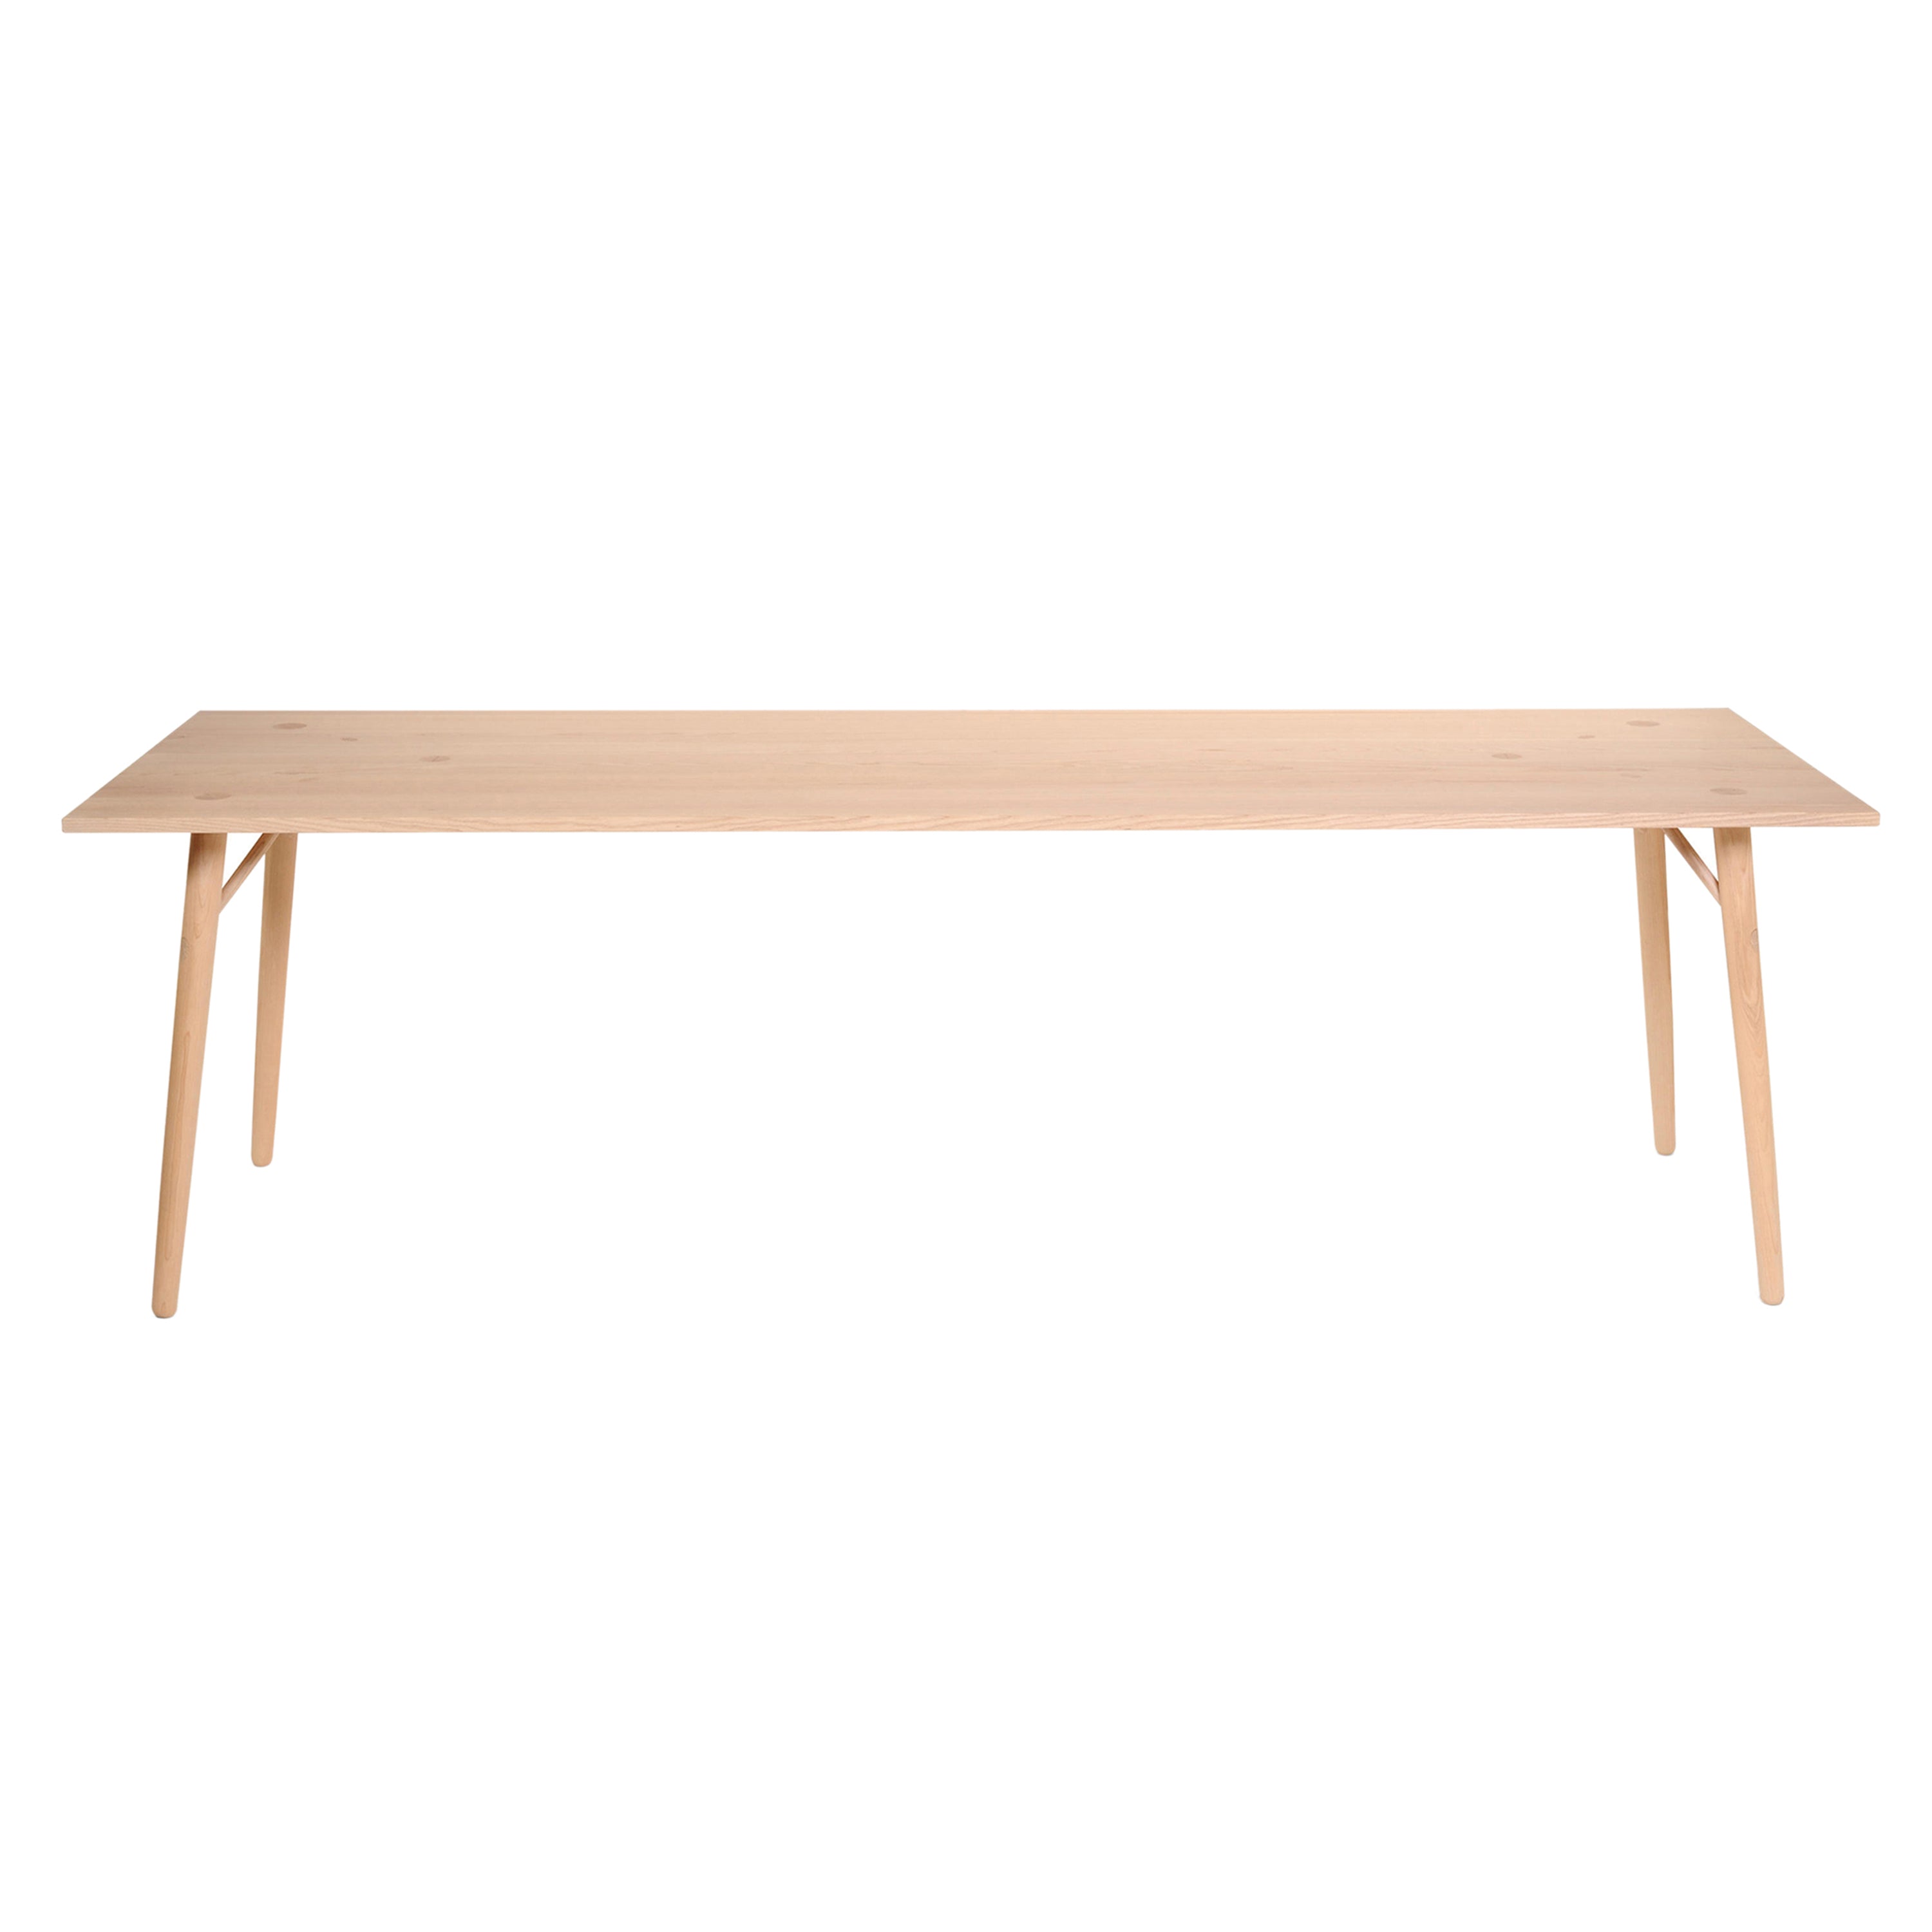 Branchmark (4) Table: Extra Large - 110.2